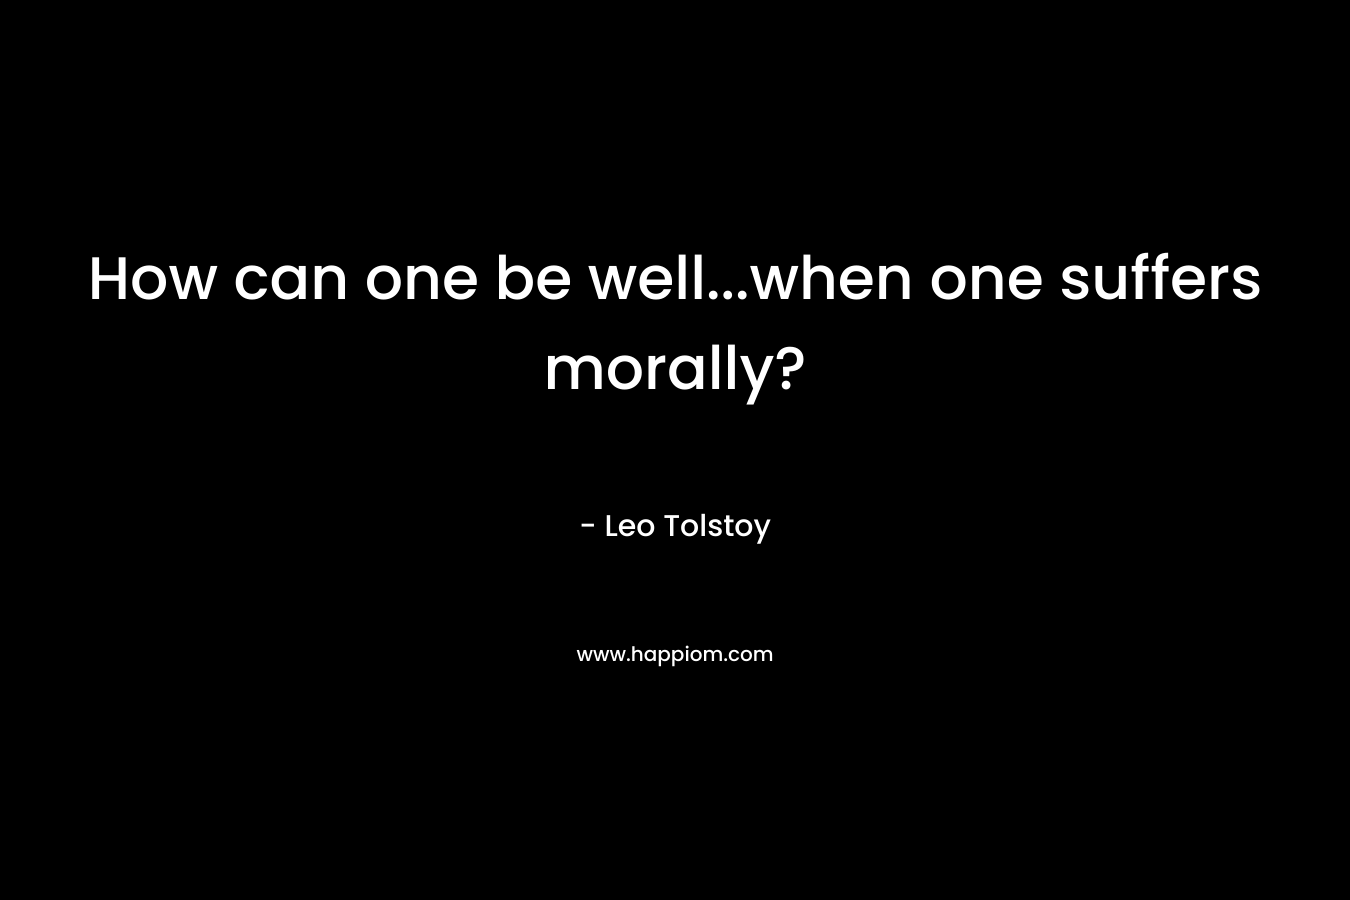 How can one be well…when one suffers morally? – Leo Tolstoy